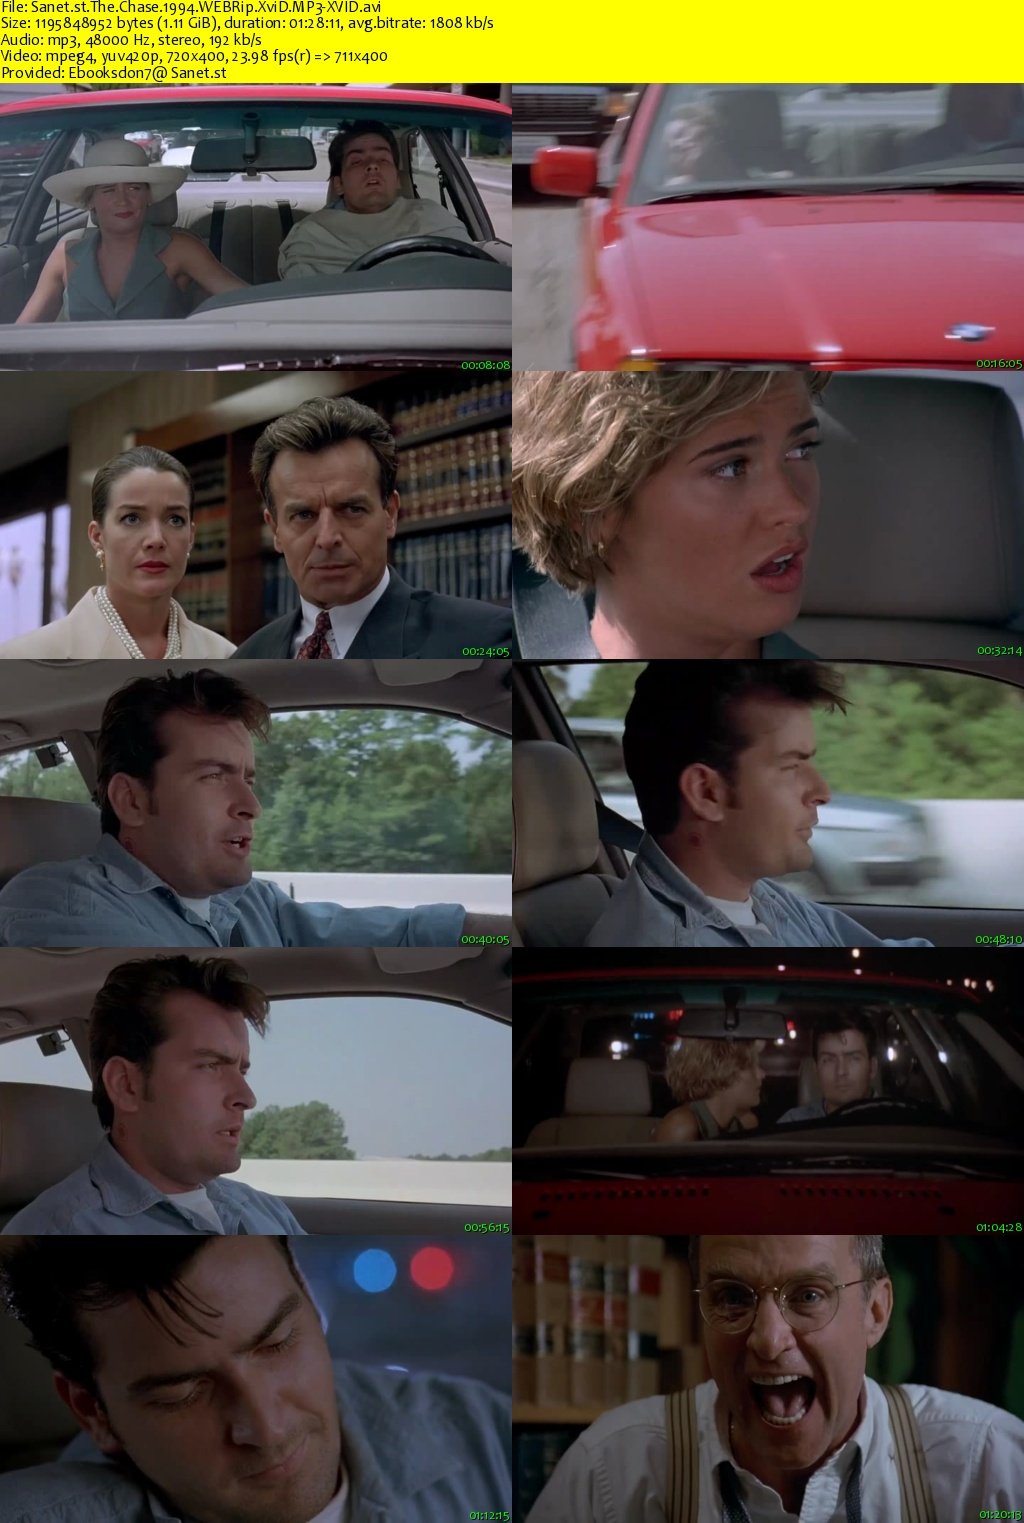 The Chase 1994 WEBRip XviD MP3-XVID.